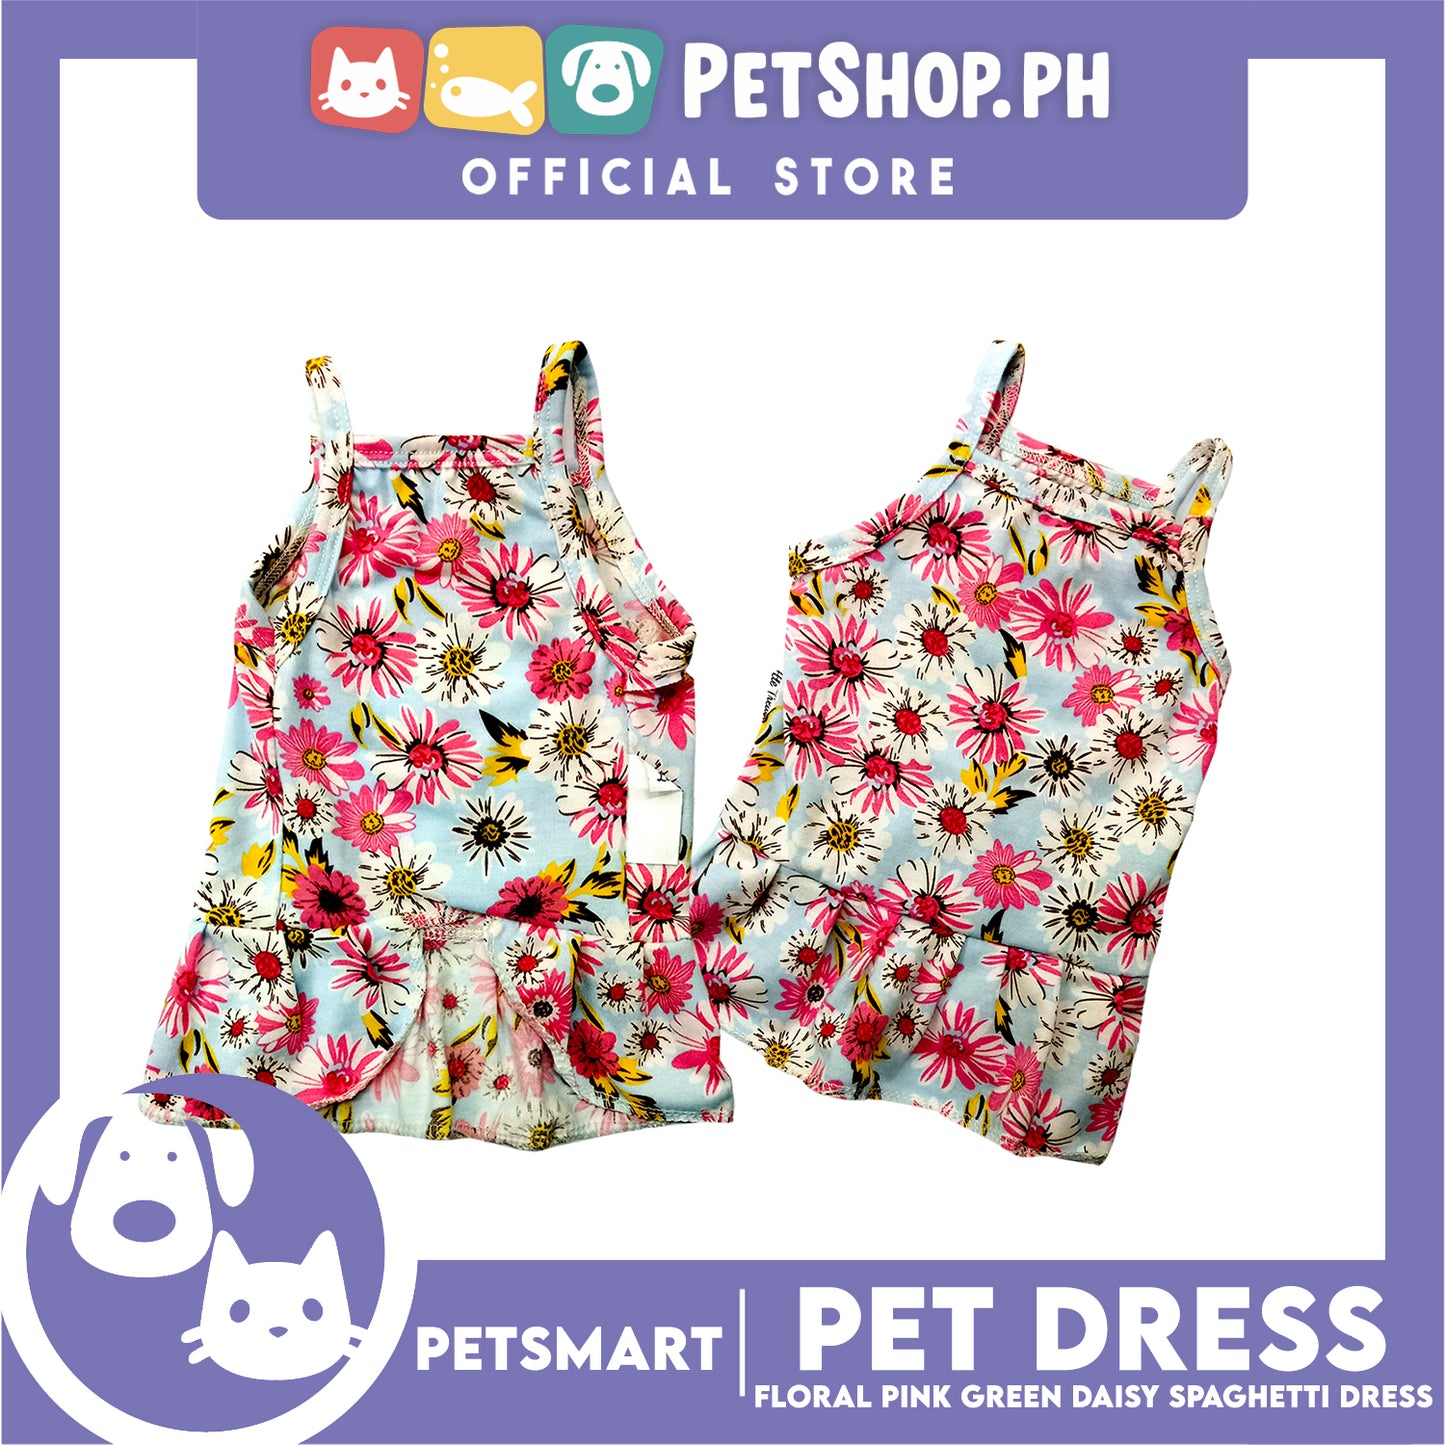 Pet Dress Floral Design, Pink Green Color Daisy Spaghetti Dress (XL) Perfect Fit for Dogs and Cats